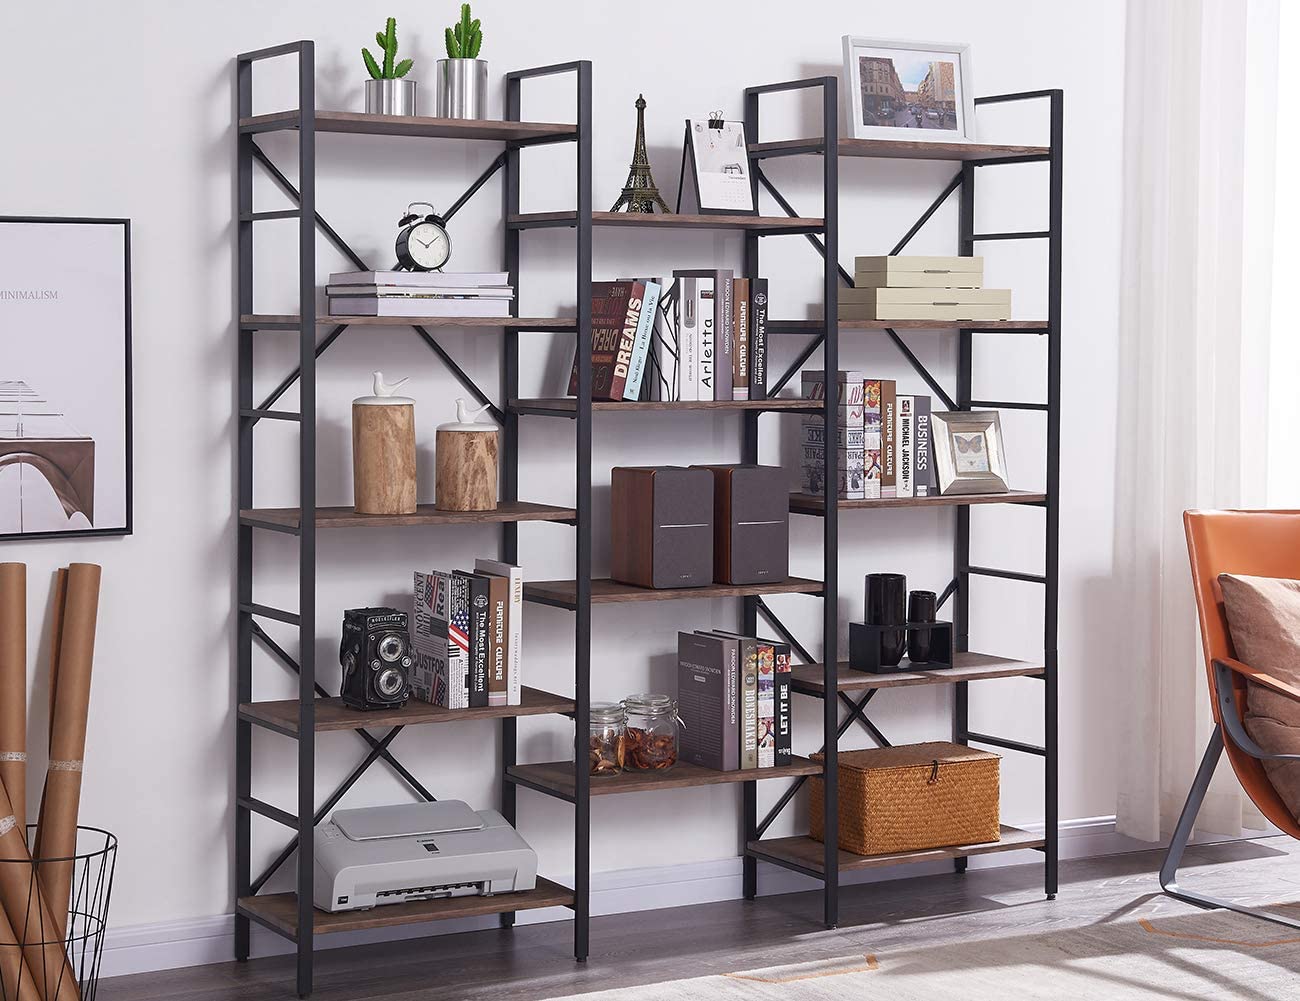 SUPERJARE Triple Wide 5-Tier Bookshelf, Rustic Industrial Style Book Shelf, Wood and Metal Bookcase Furniture for Home & Office - Vintage Brown